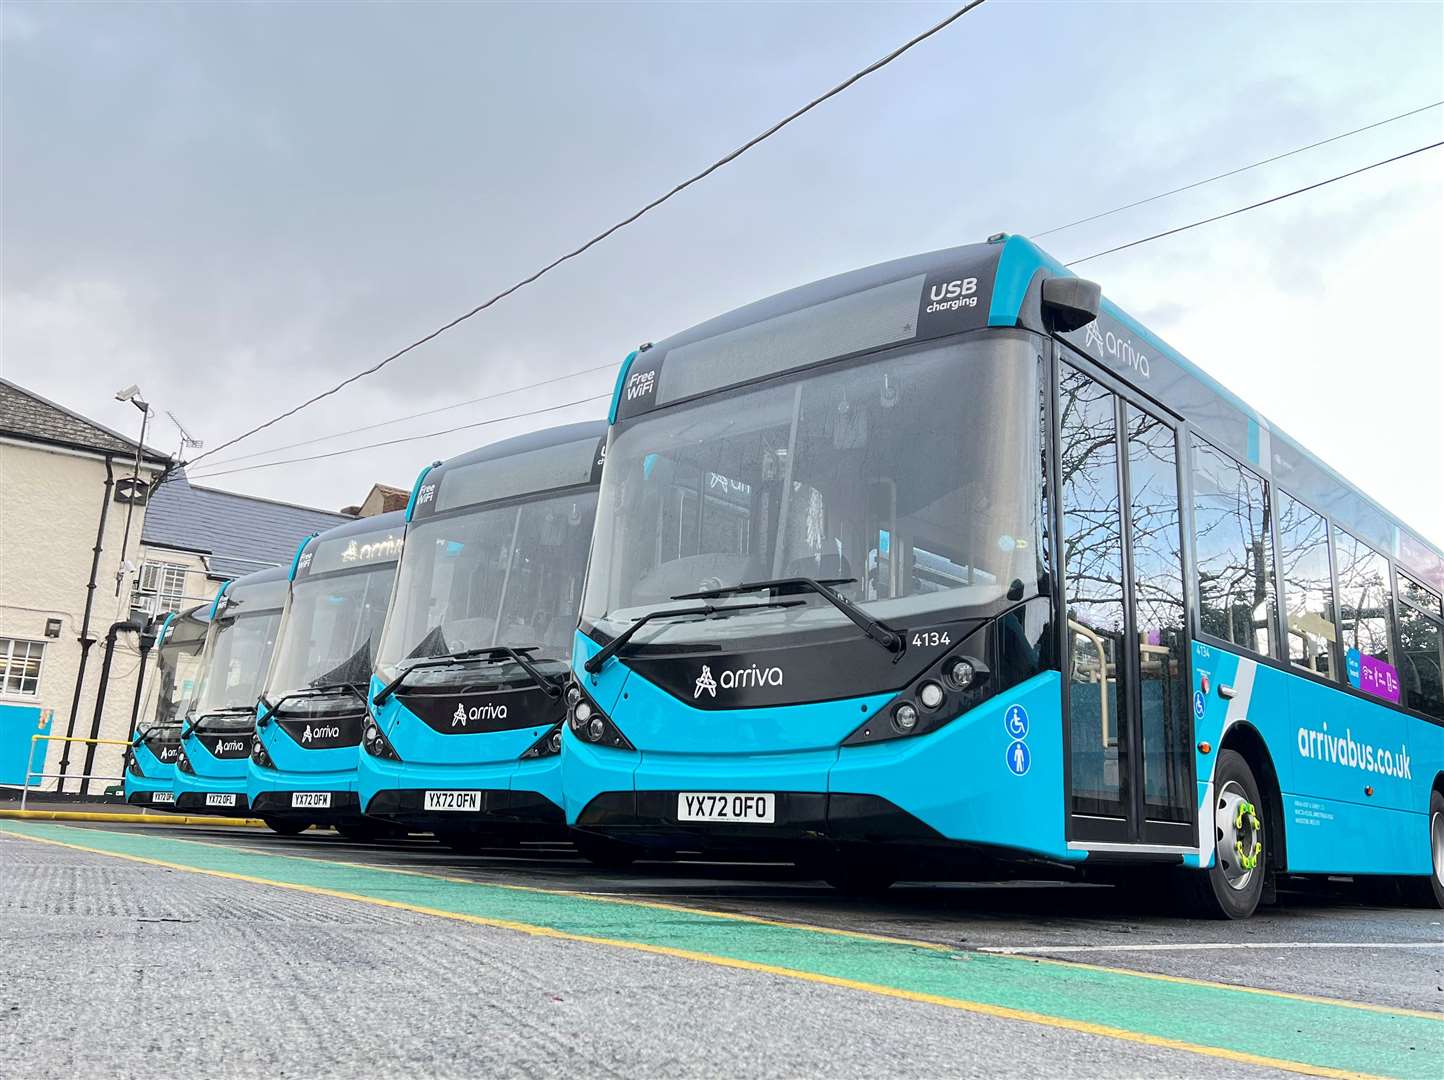 You’ll also be able to use Arriva buses